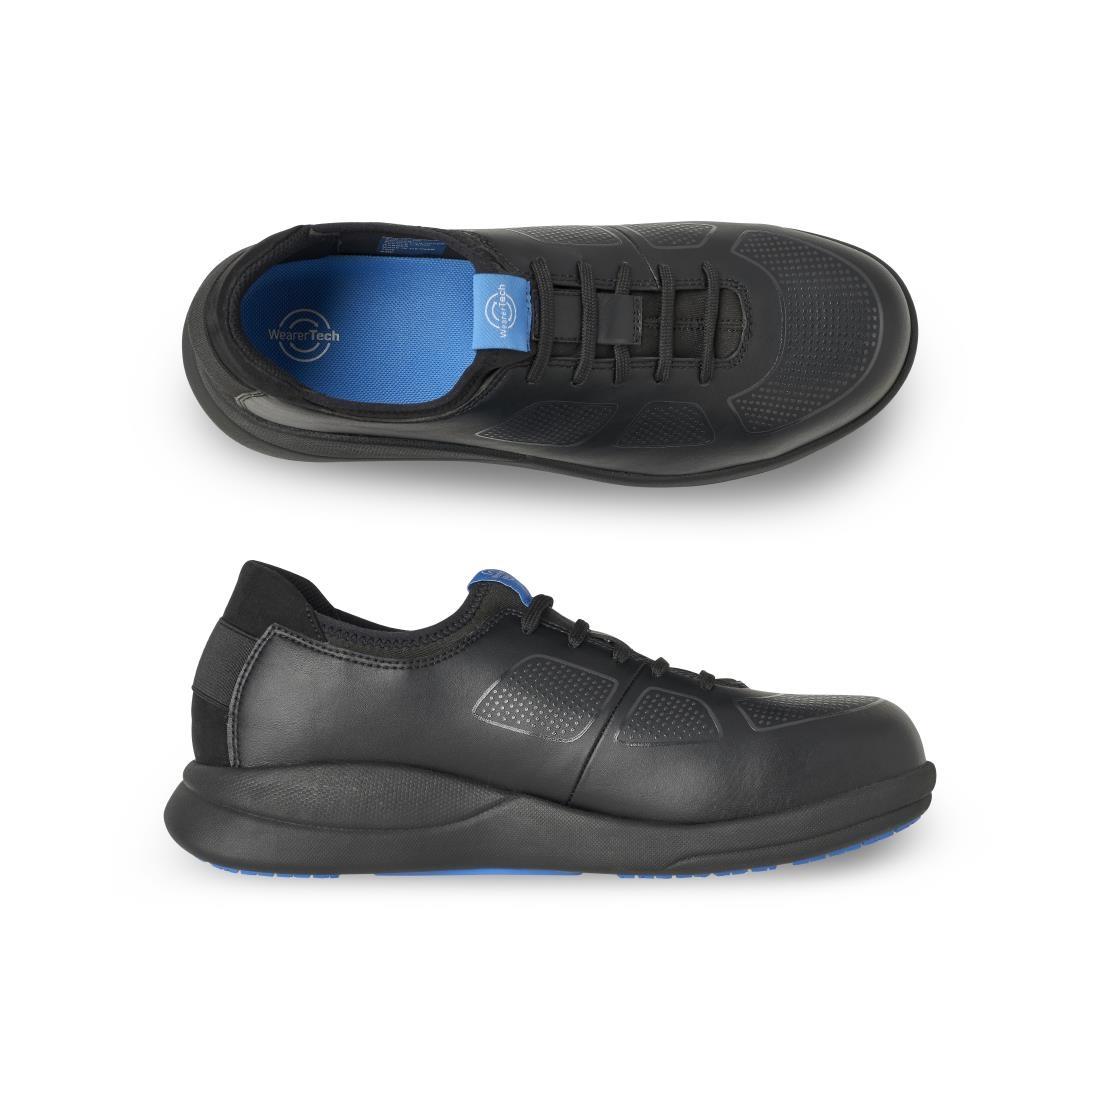 WearerTech Transform Safety Toe Trainer Black with Modular Insole Size 37